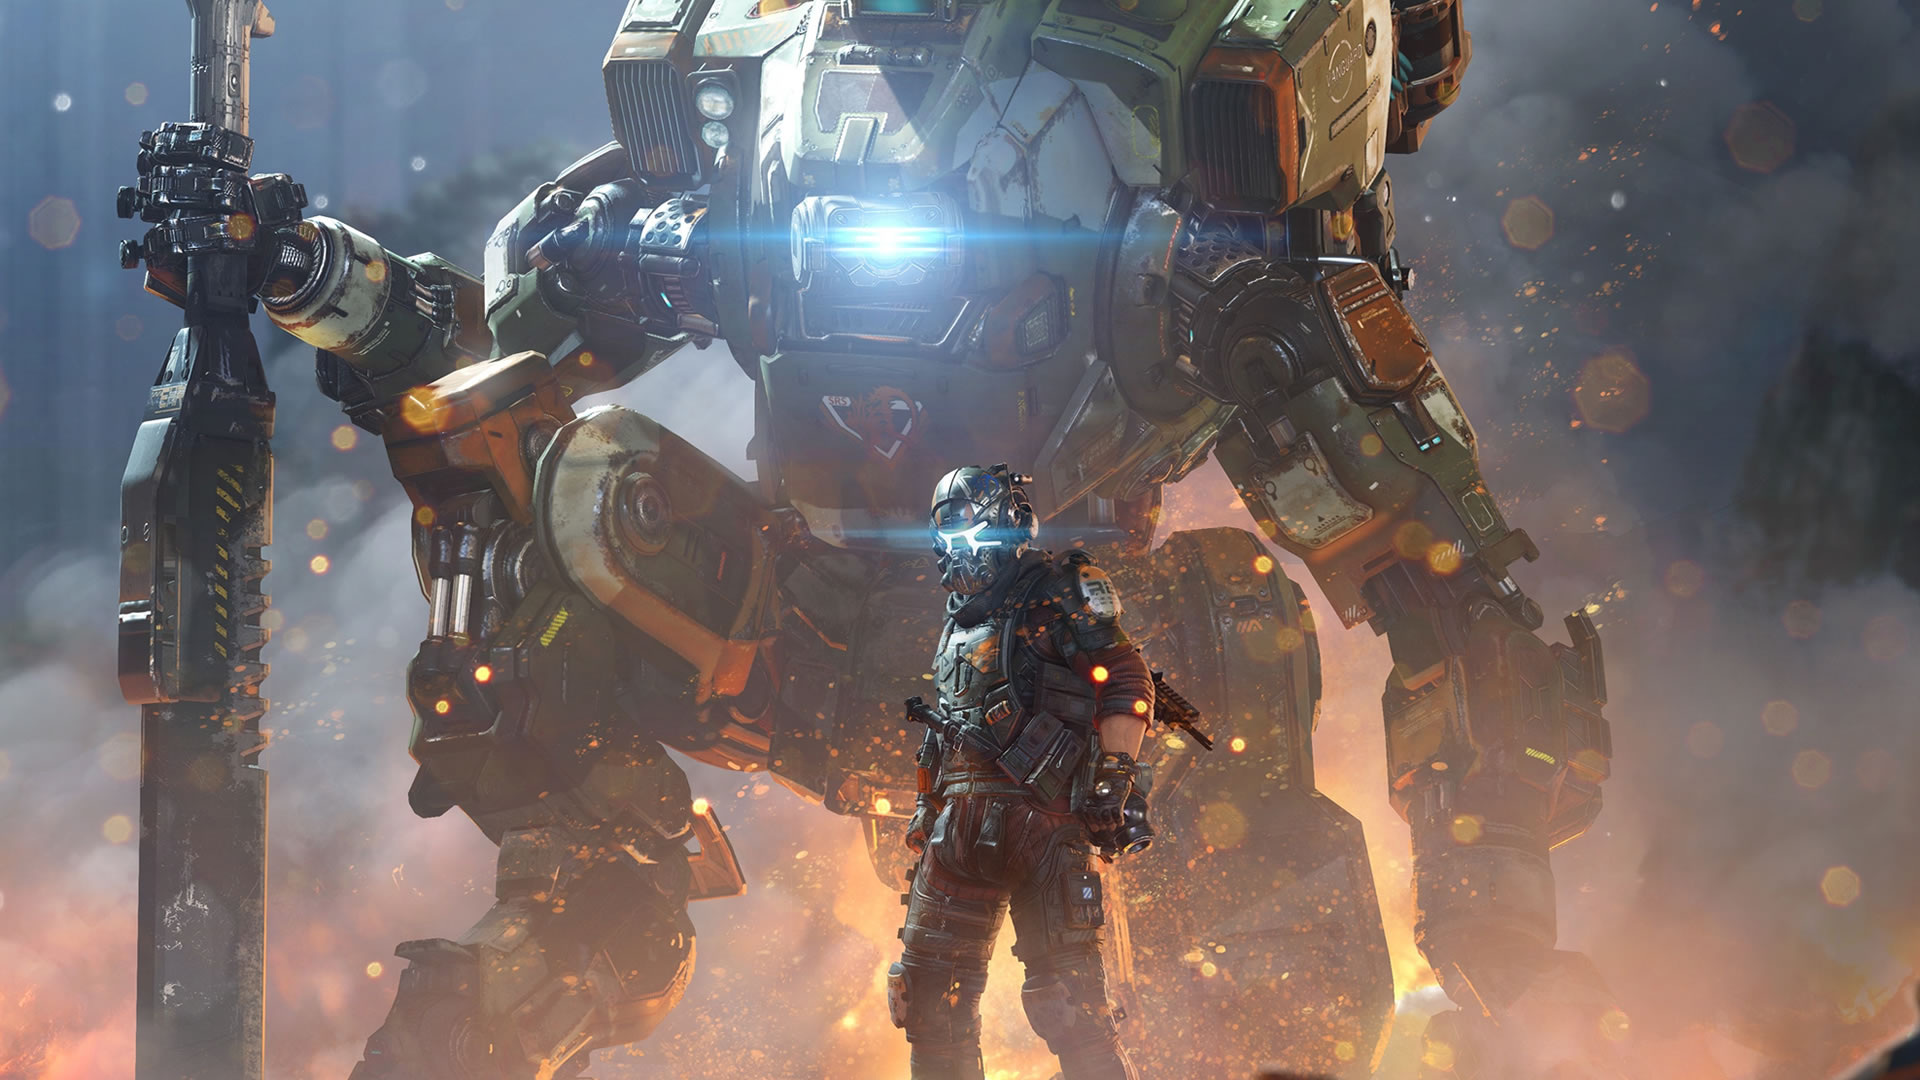 Titanfall Battle Royale coming very soon